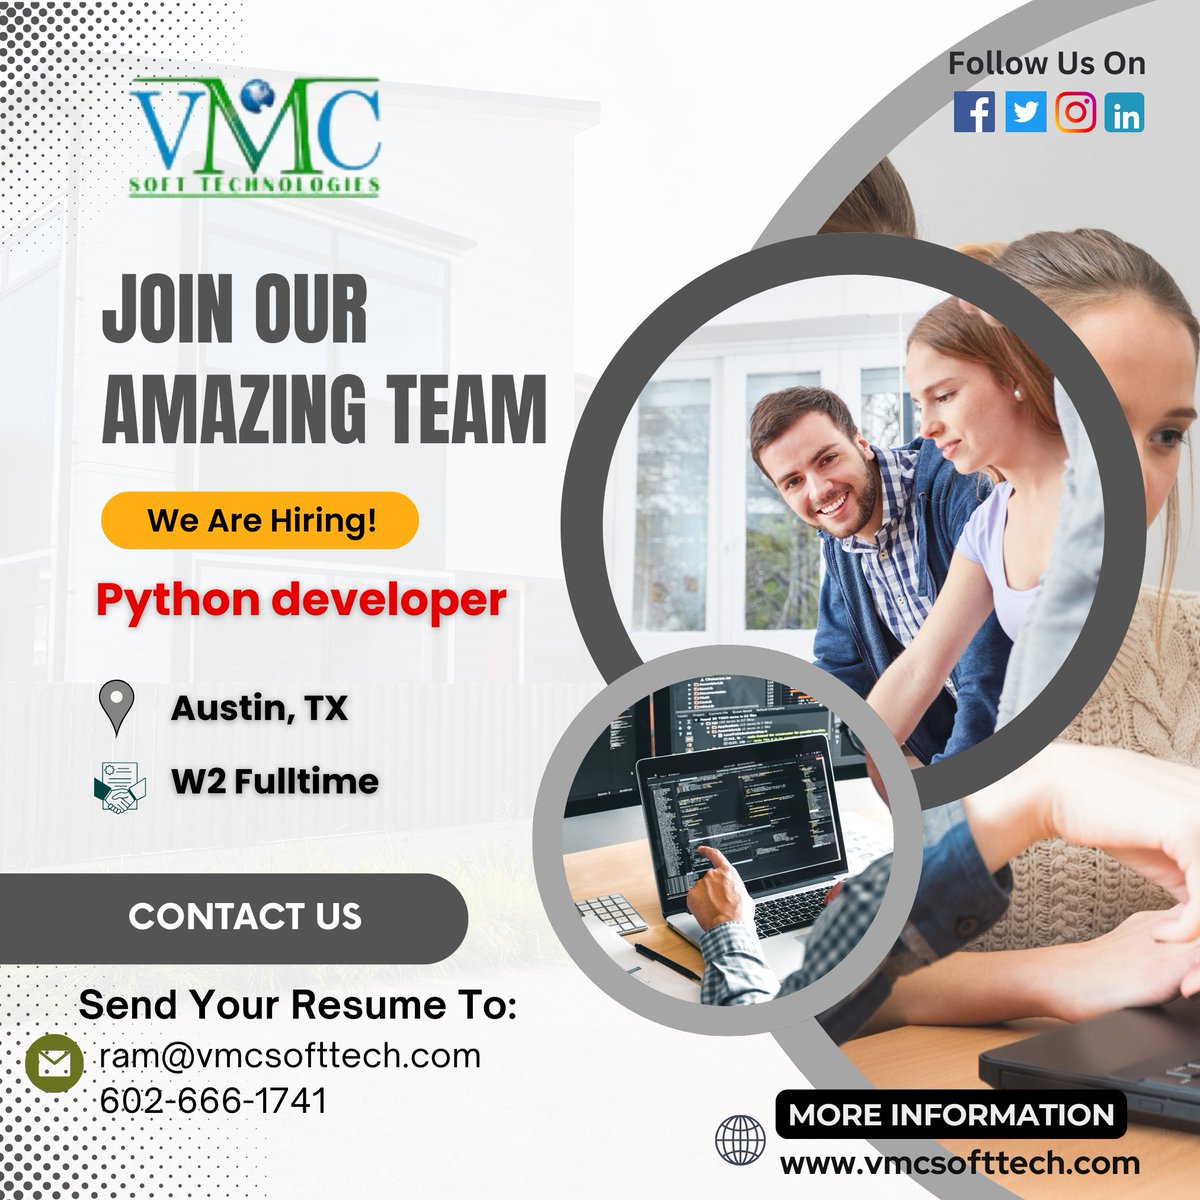 VMC Soft Technologies is looking for PYTHON DEVELOPER in Austin,TX Title: PYTHON DEVELOPER Location: Austin,TX Contract: W2 Fulltime For more details: ram@vmcsofttech.com/ 602-666-1741 Apply Now At: vmcsofttech.com/careers/ #python #programming #coding #java #javascript